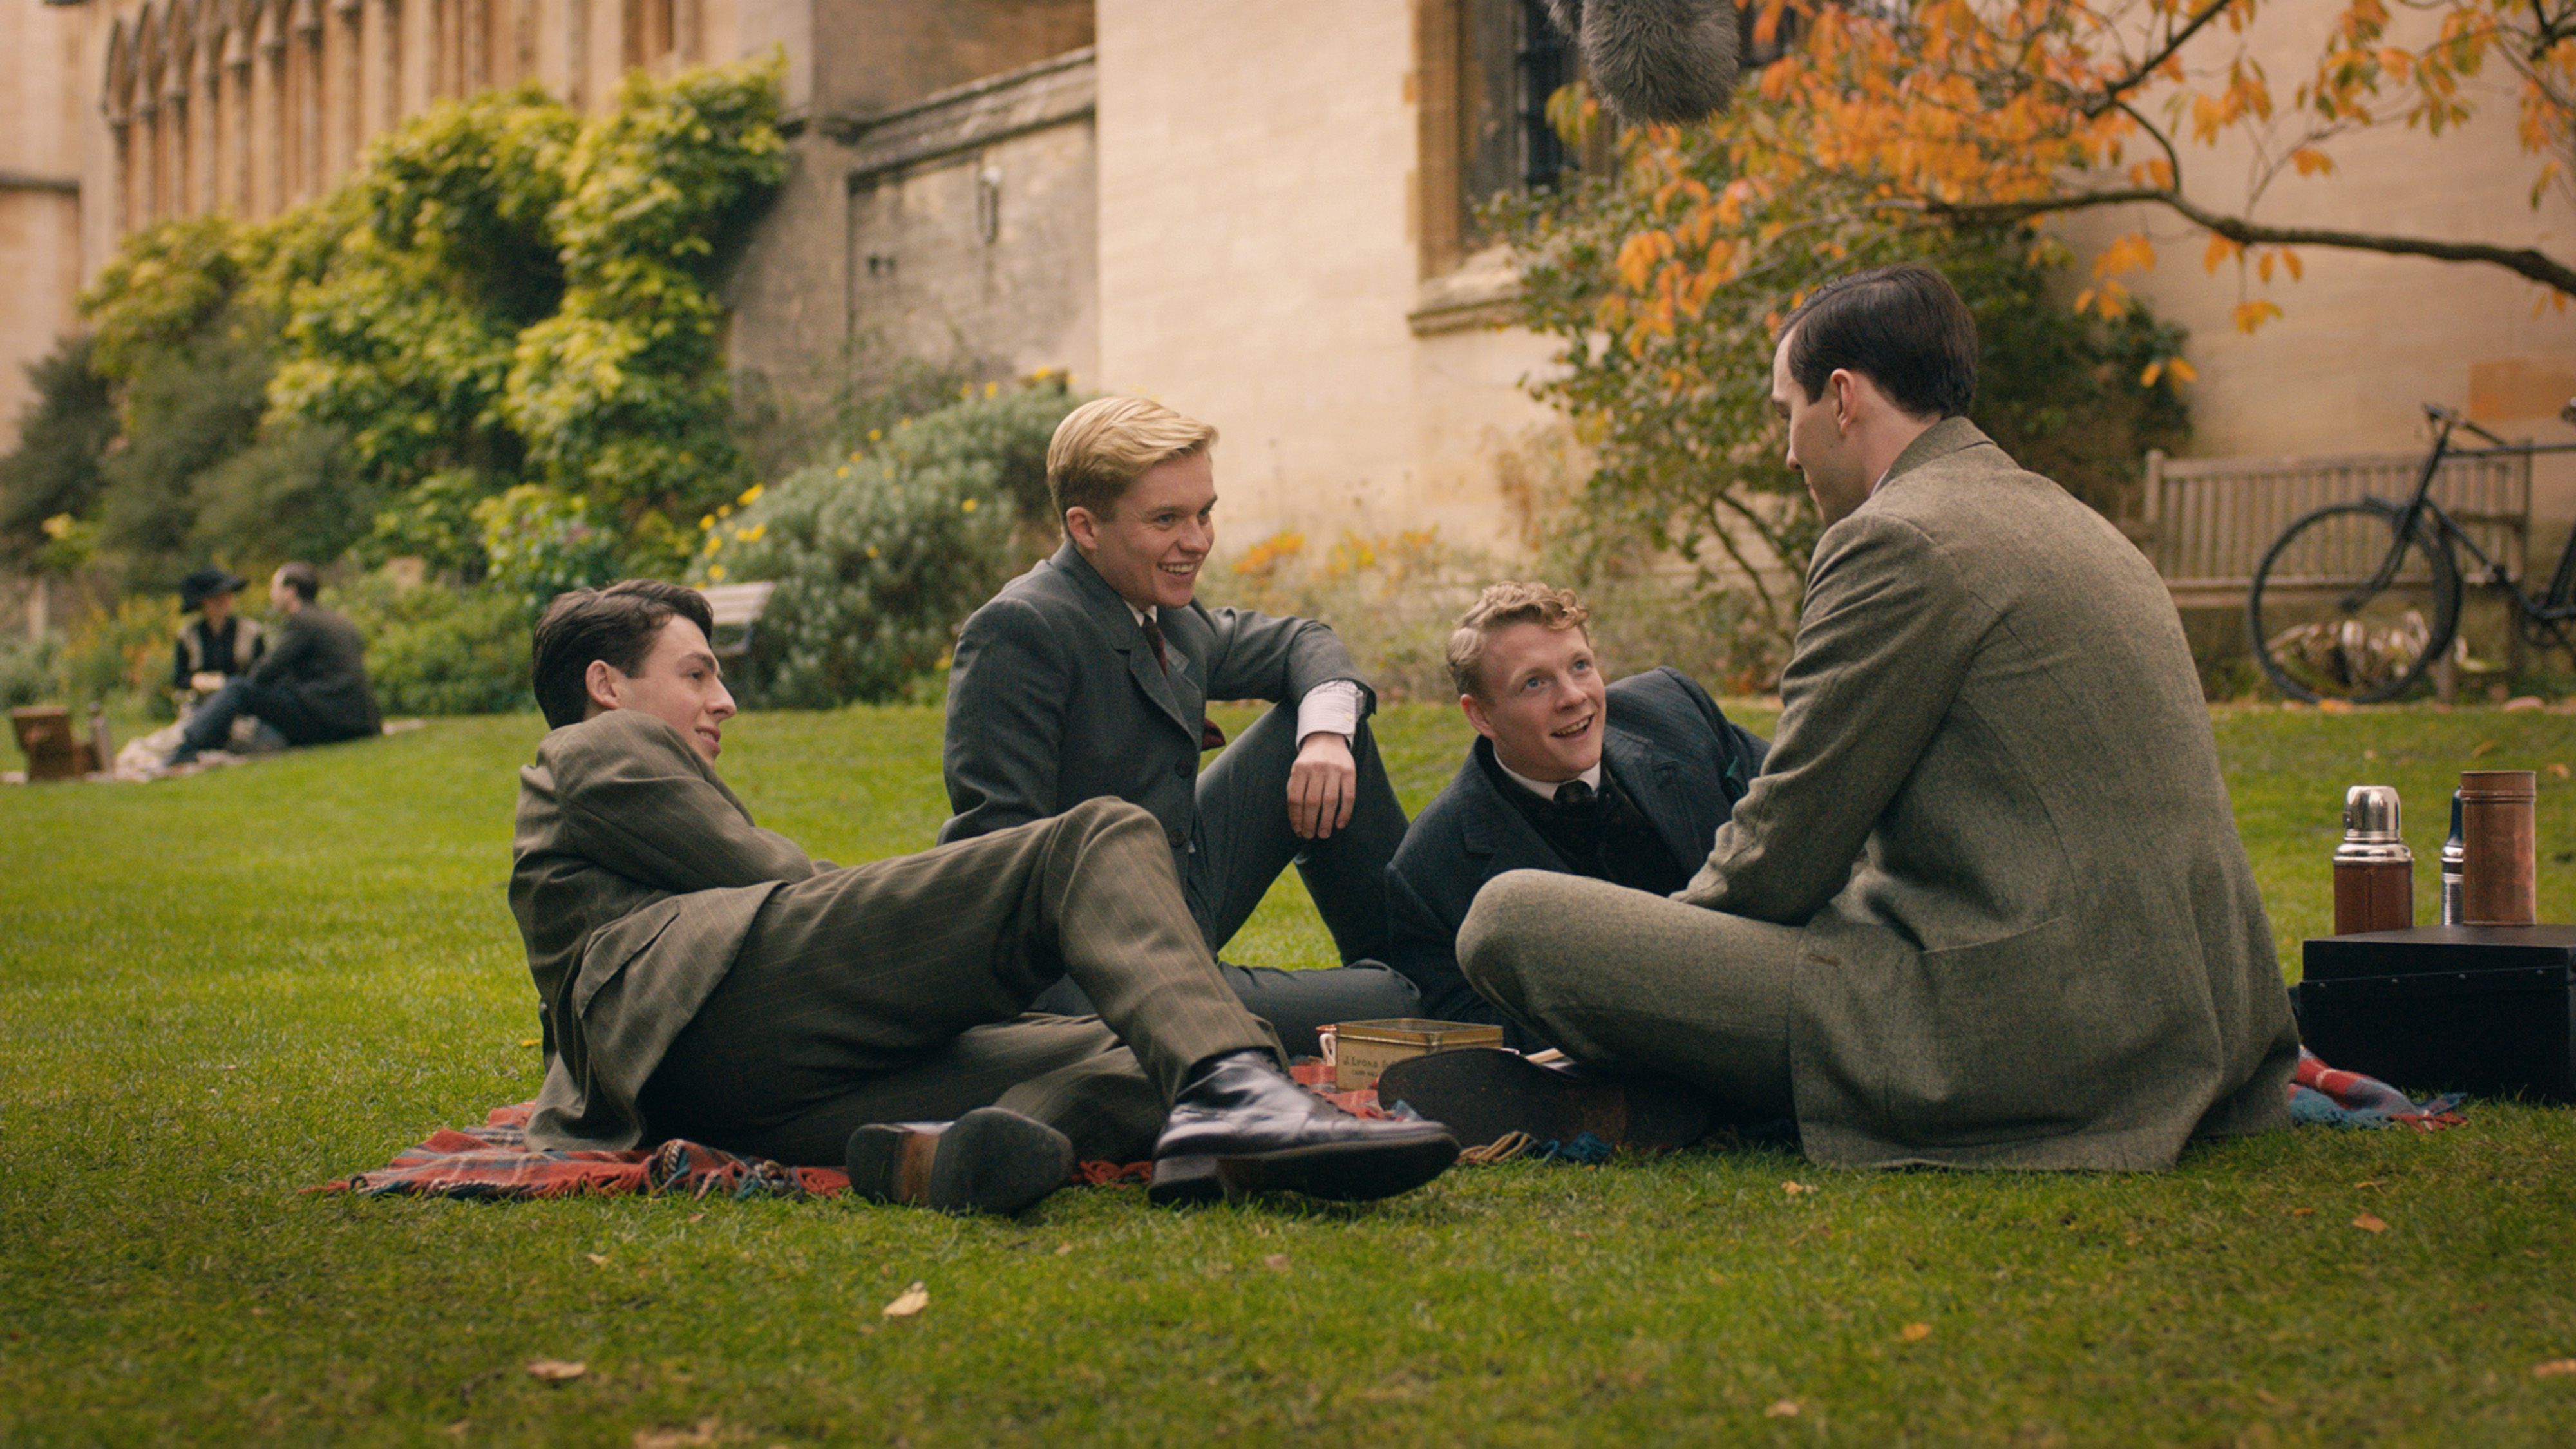 Nicholas Hoult as J.R.R. Tolkien (Right) with School Chums